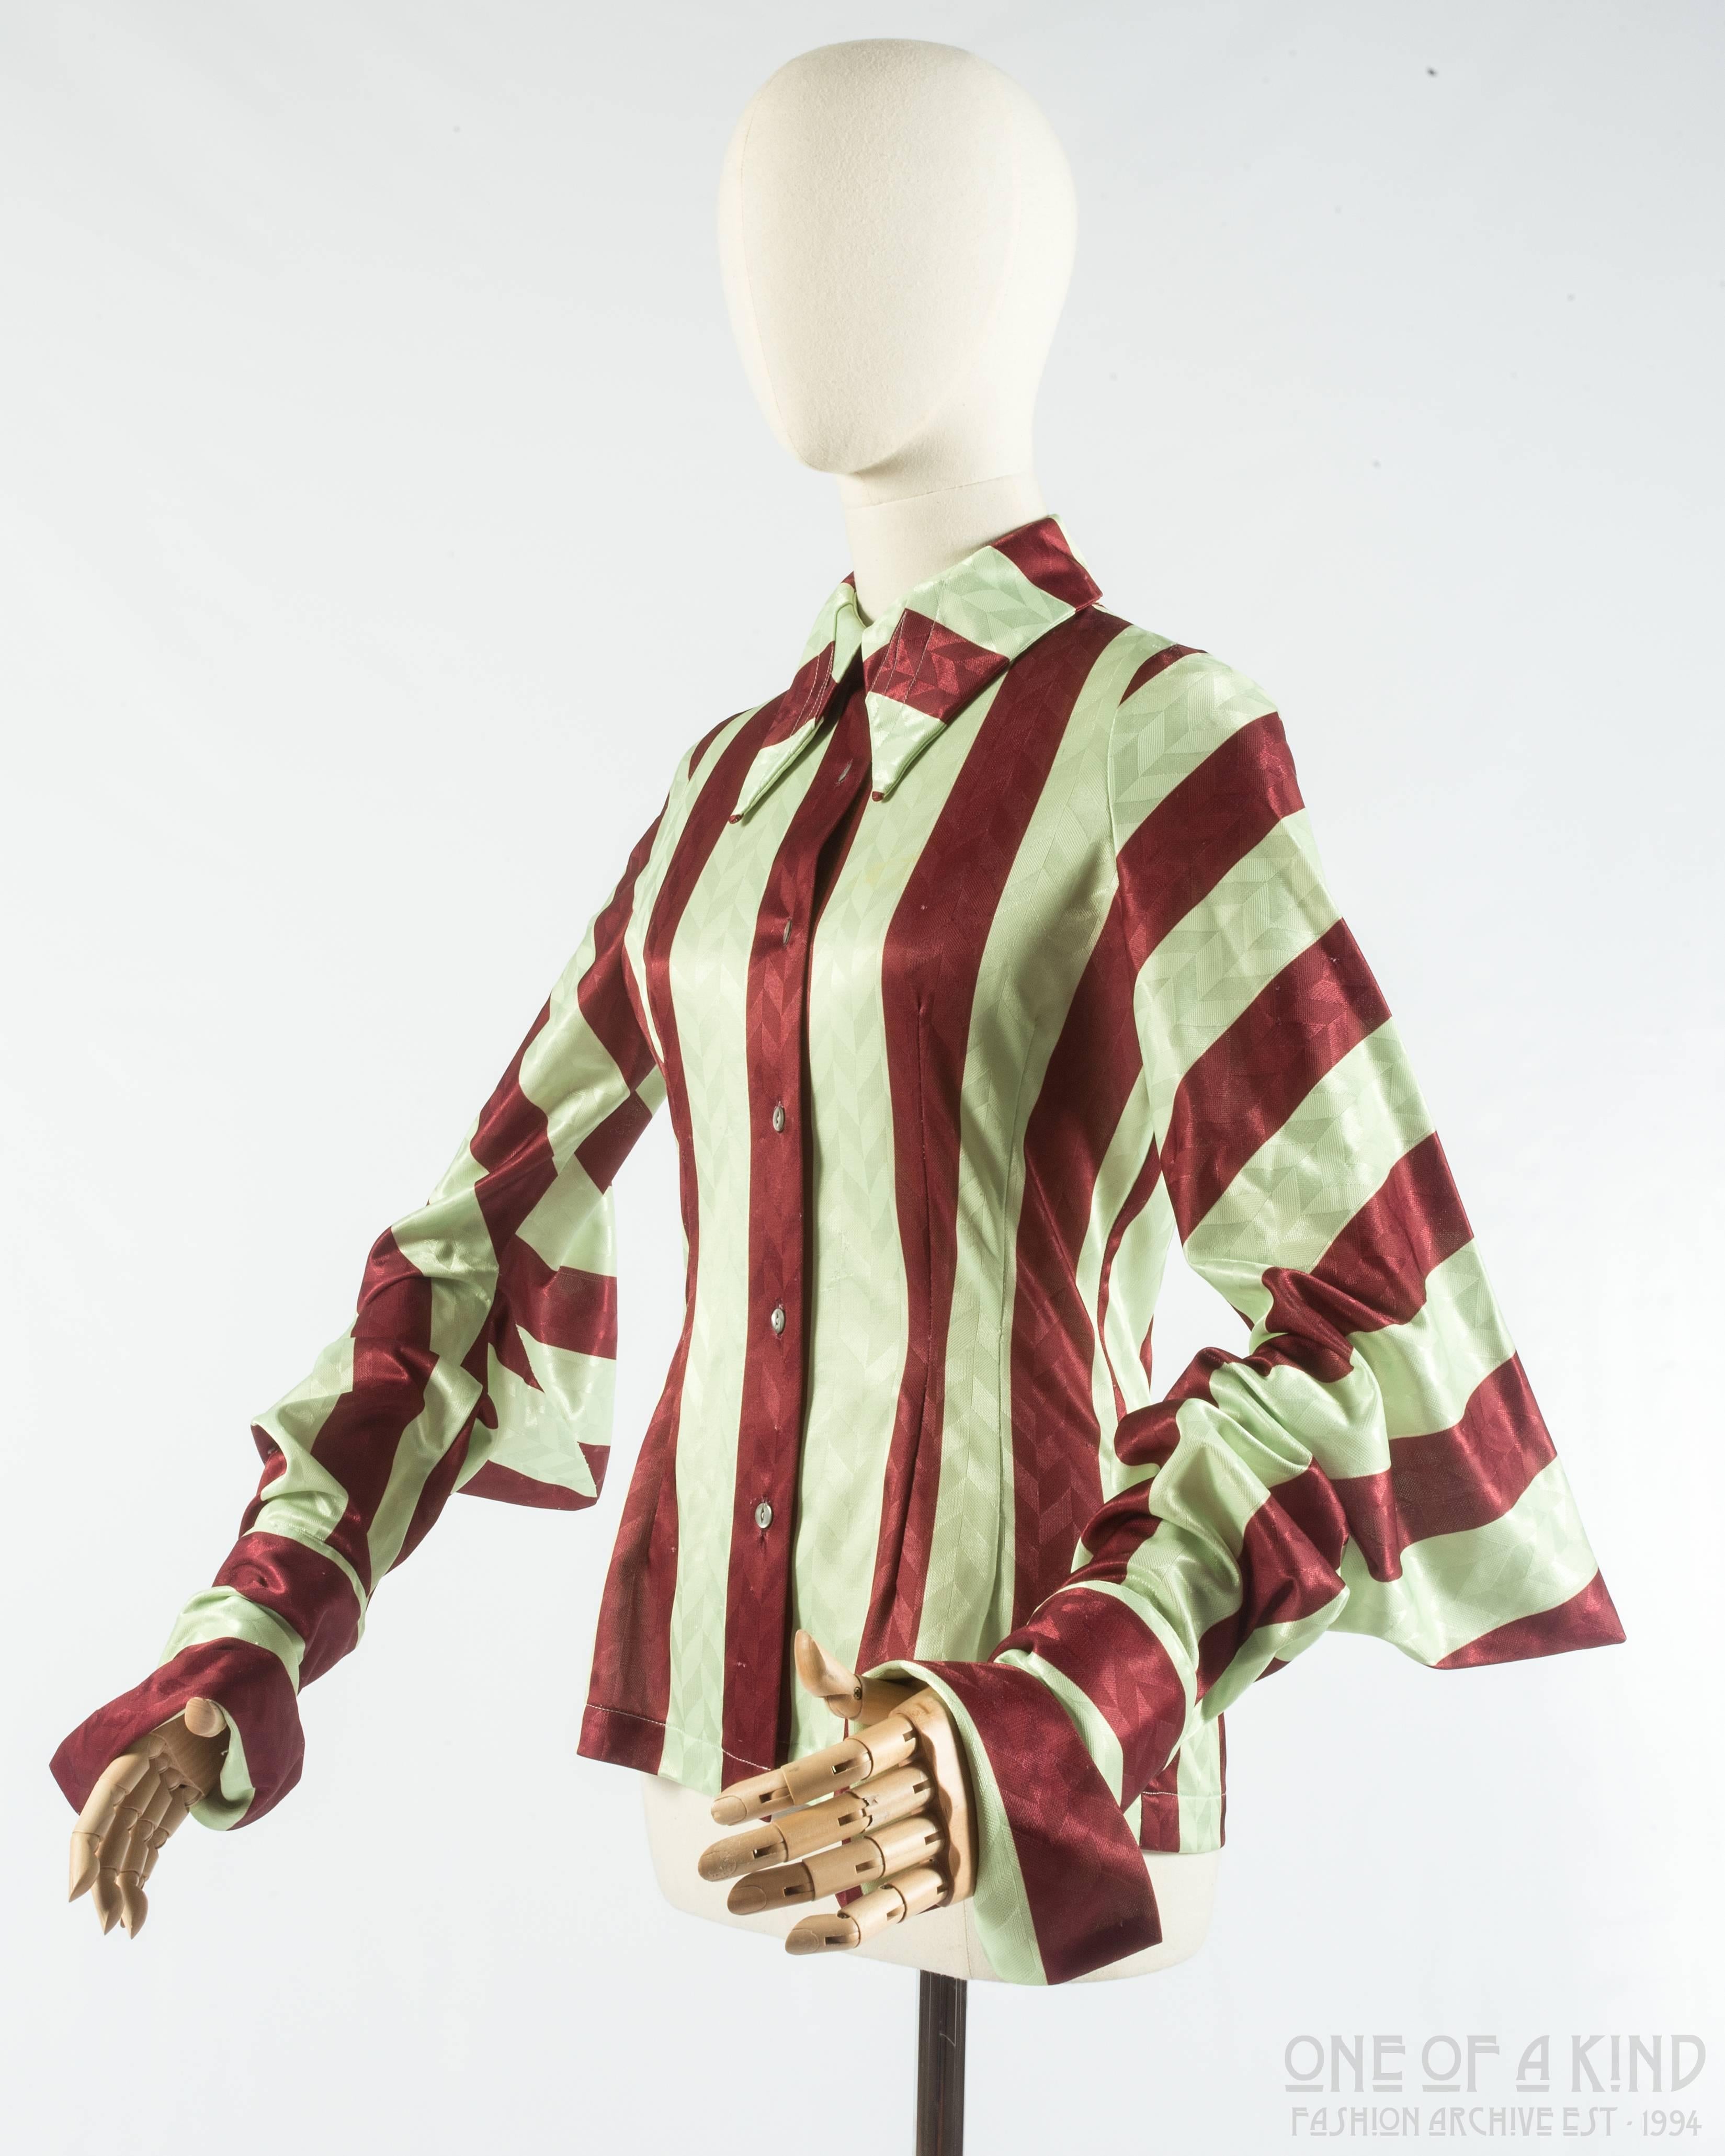 John Galliano red and yellow striped blouse with squared sleeves

Spring-Summer 1991